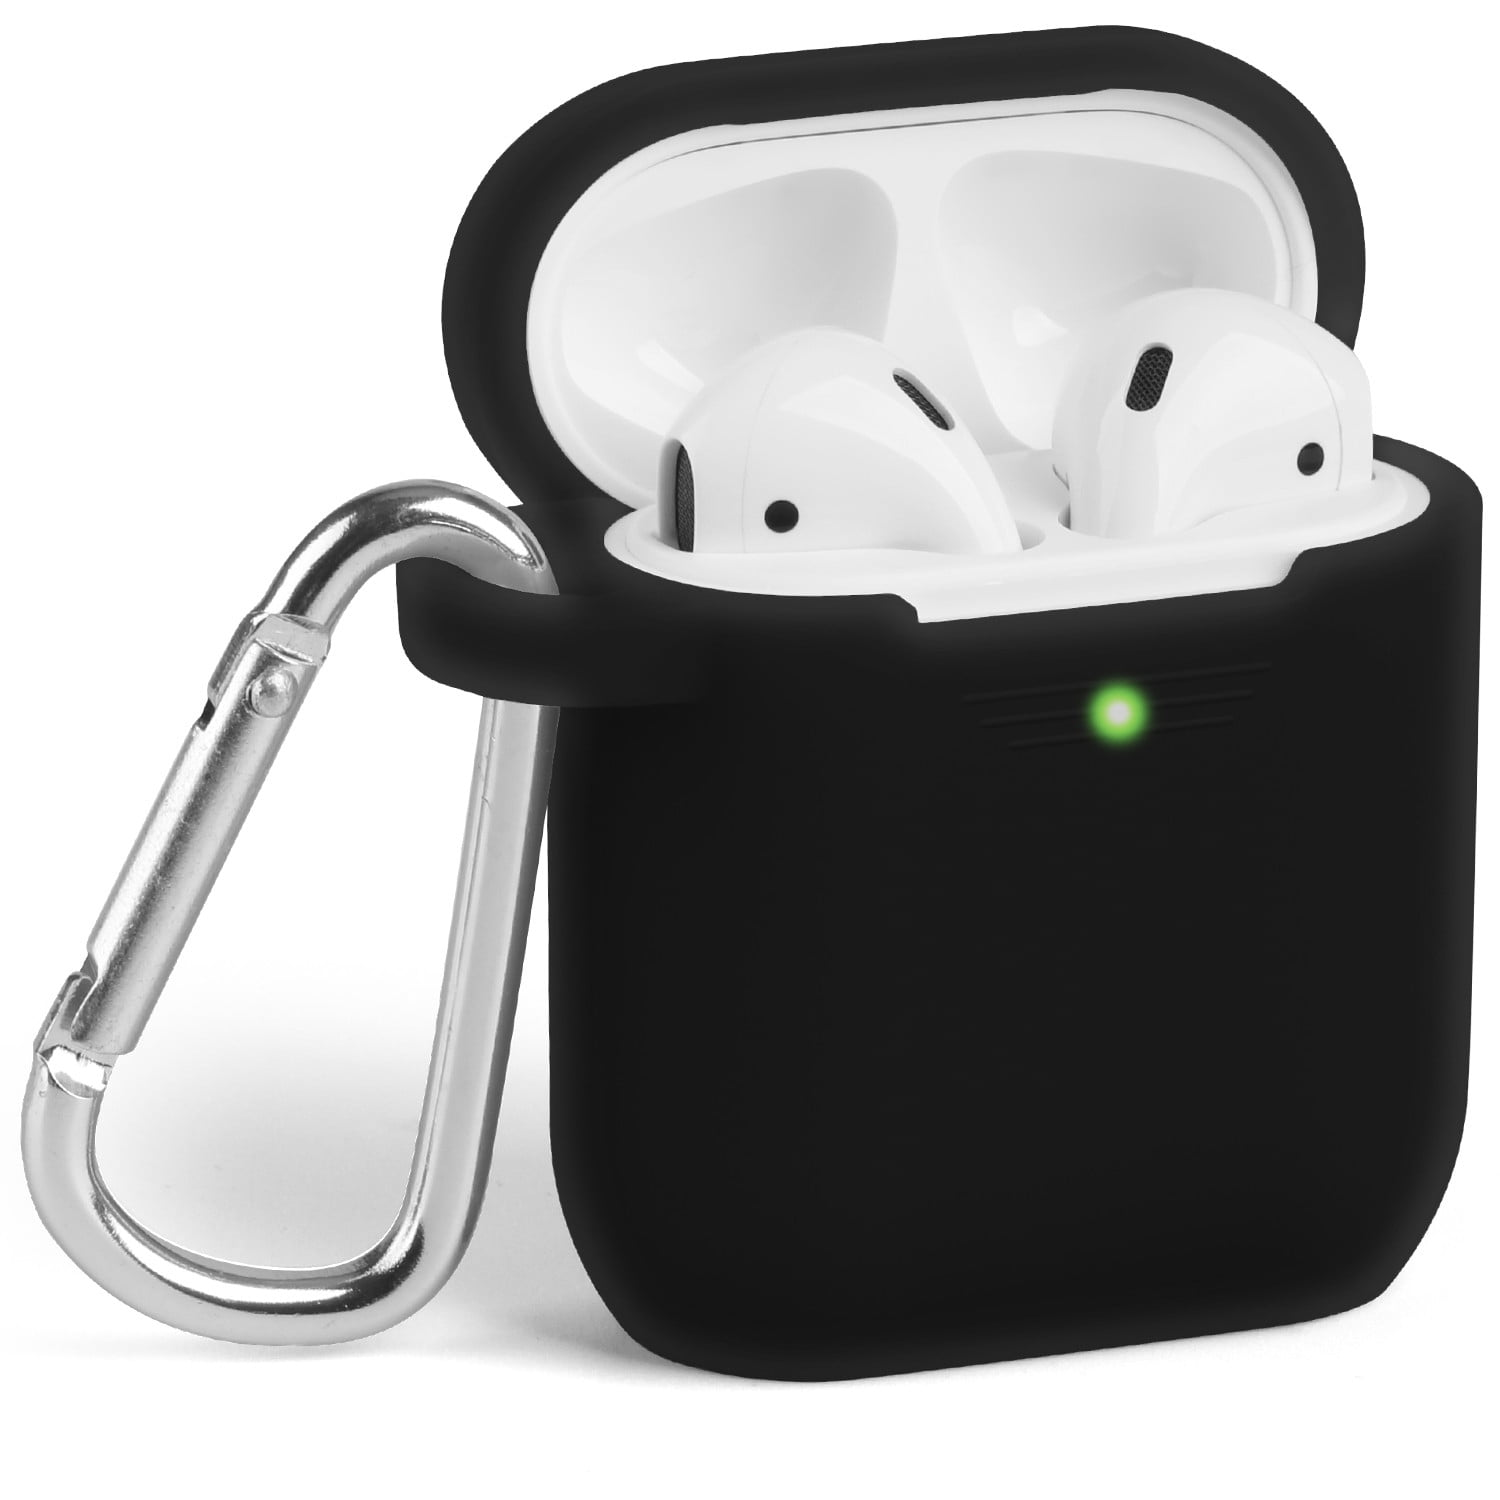 A Earphone Accessories Airpods Case Protective Silicone Cover Skin for Apple Airpods